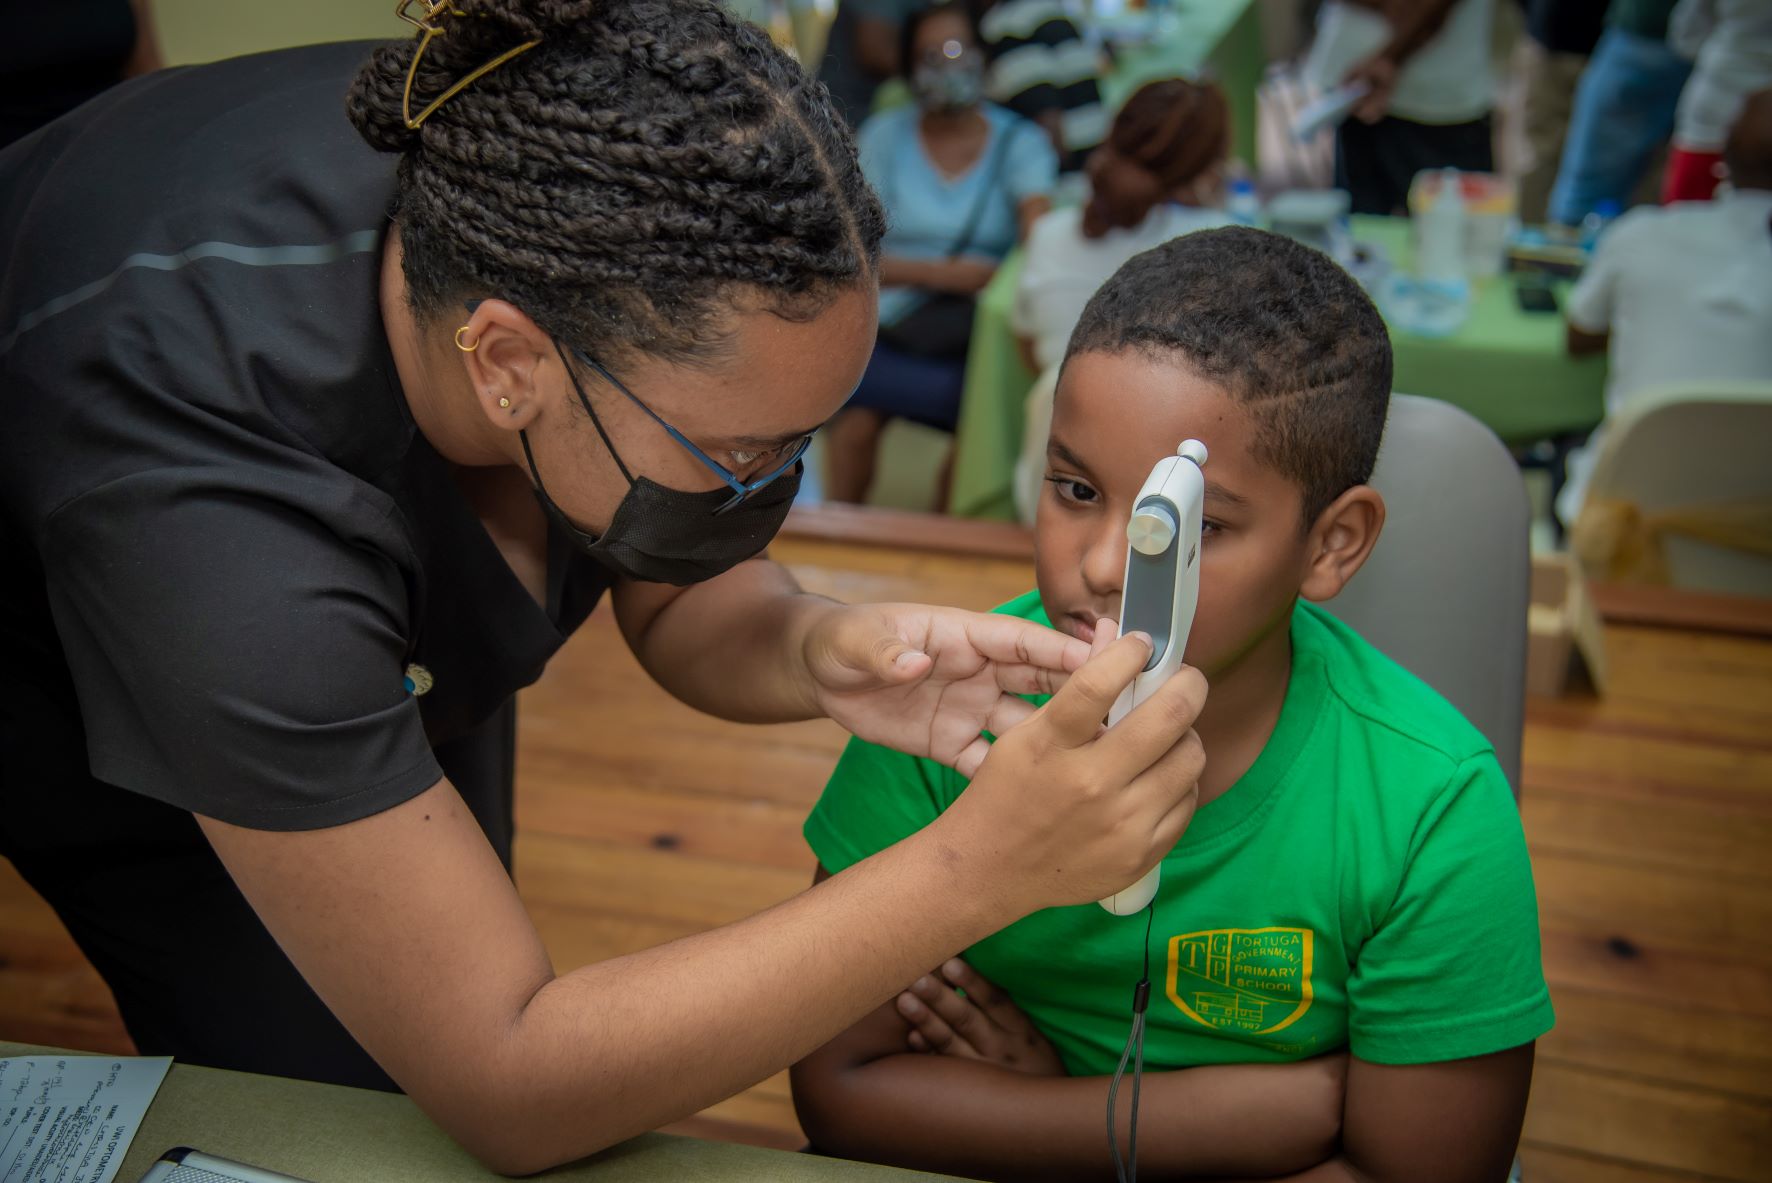 UWI Optometry and Canadian Vision Care: Bringing Eyecare to the Community